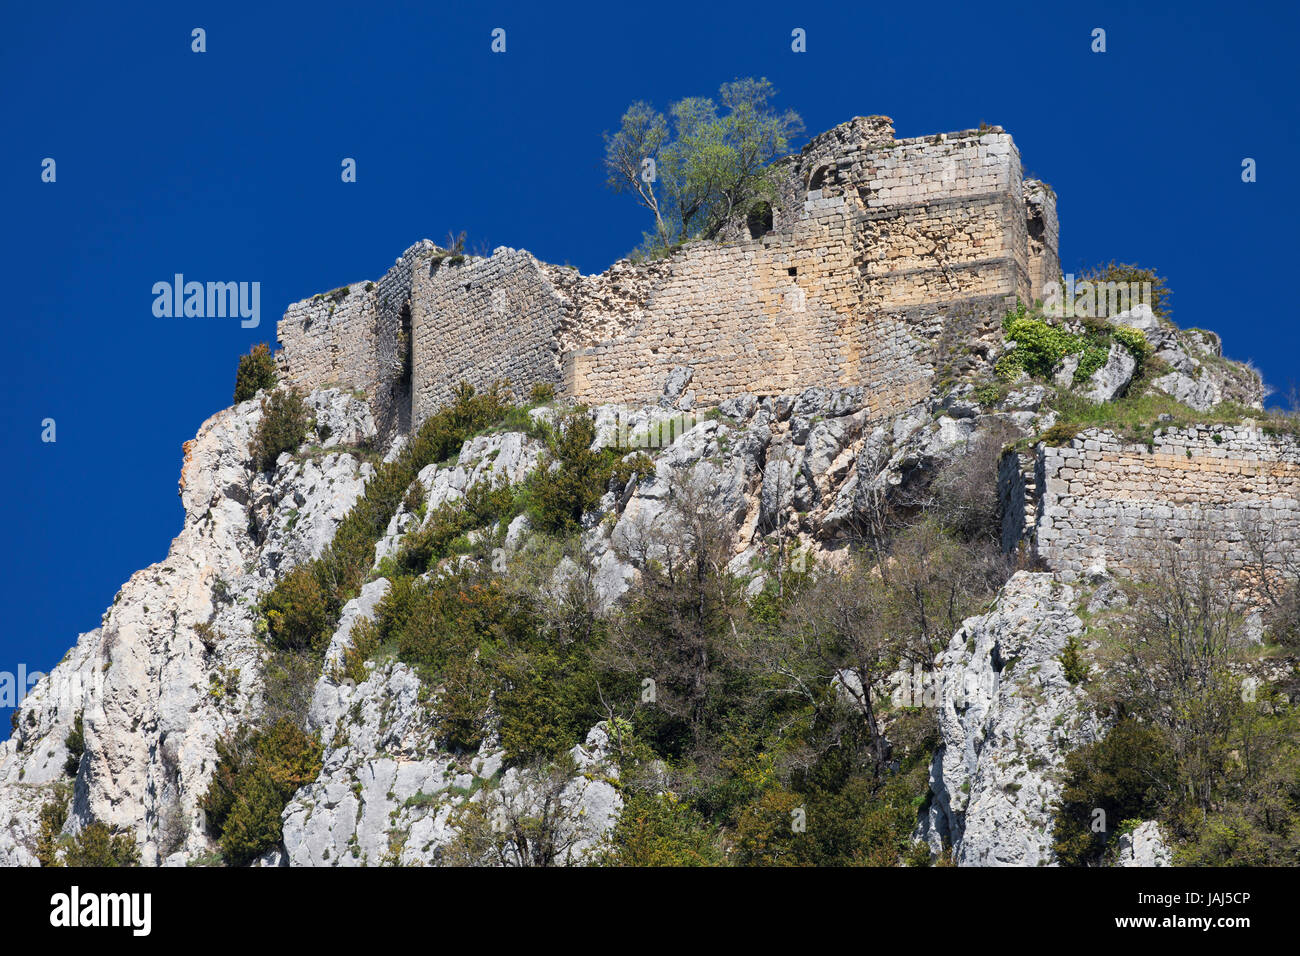 Ruins of the Chateau de Roquefixade, Occitanie, France. Stock Photo